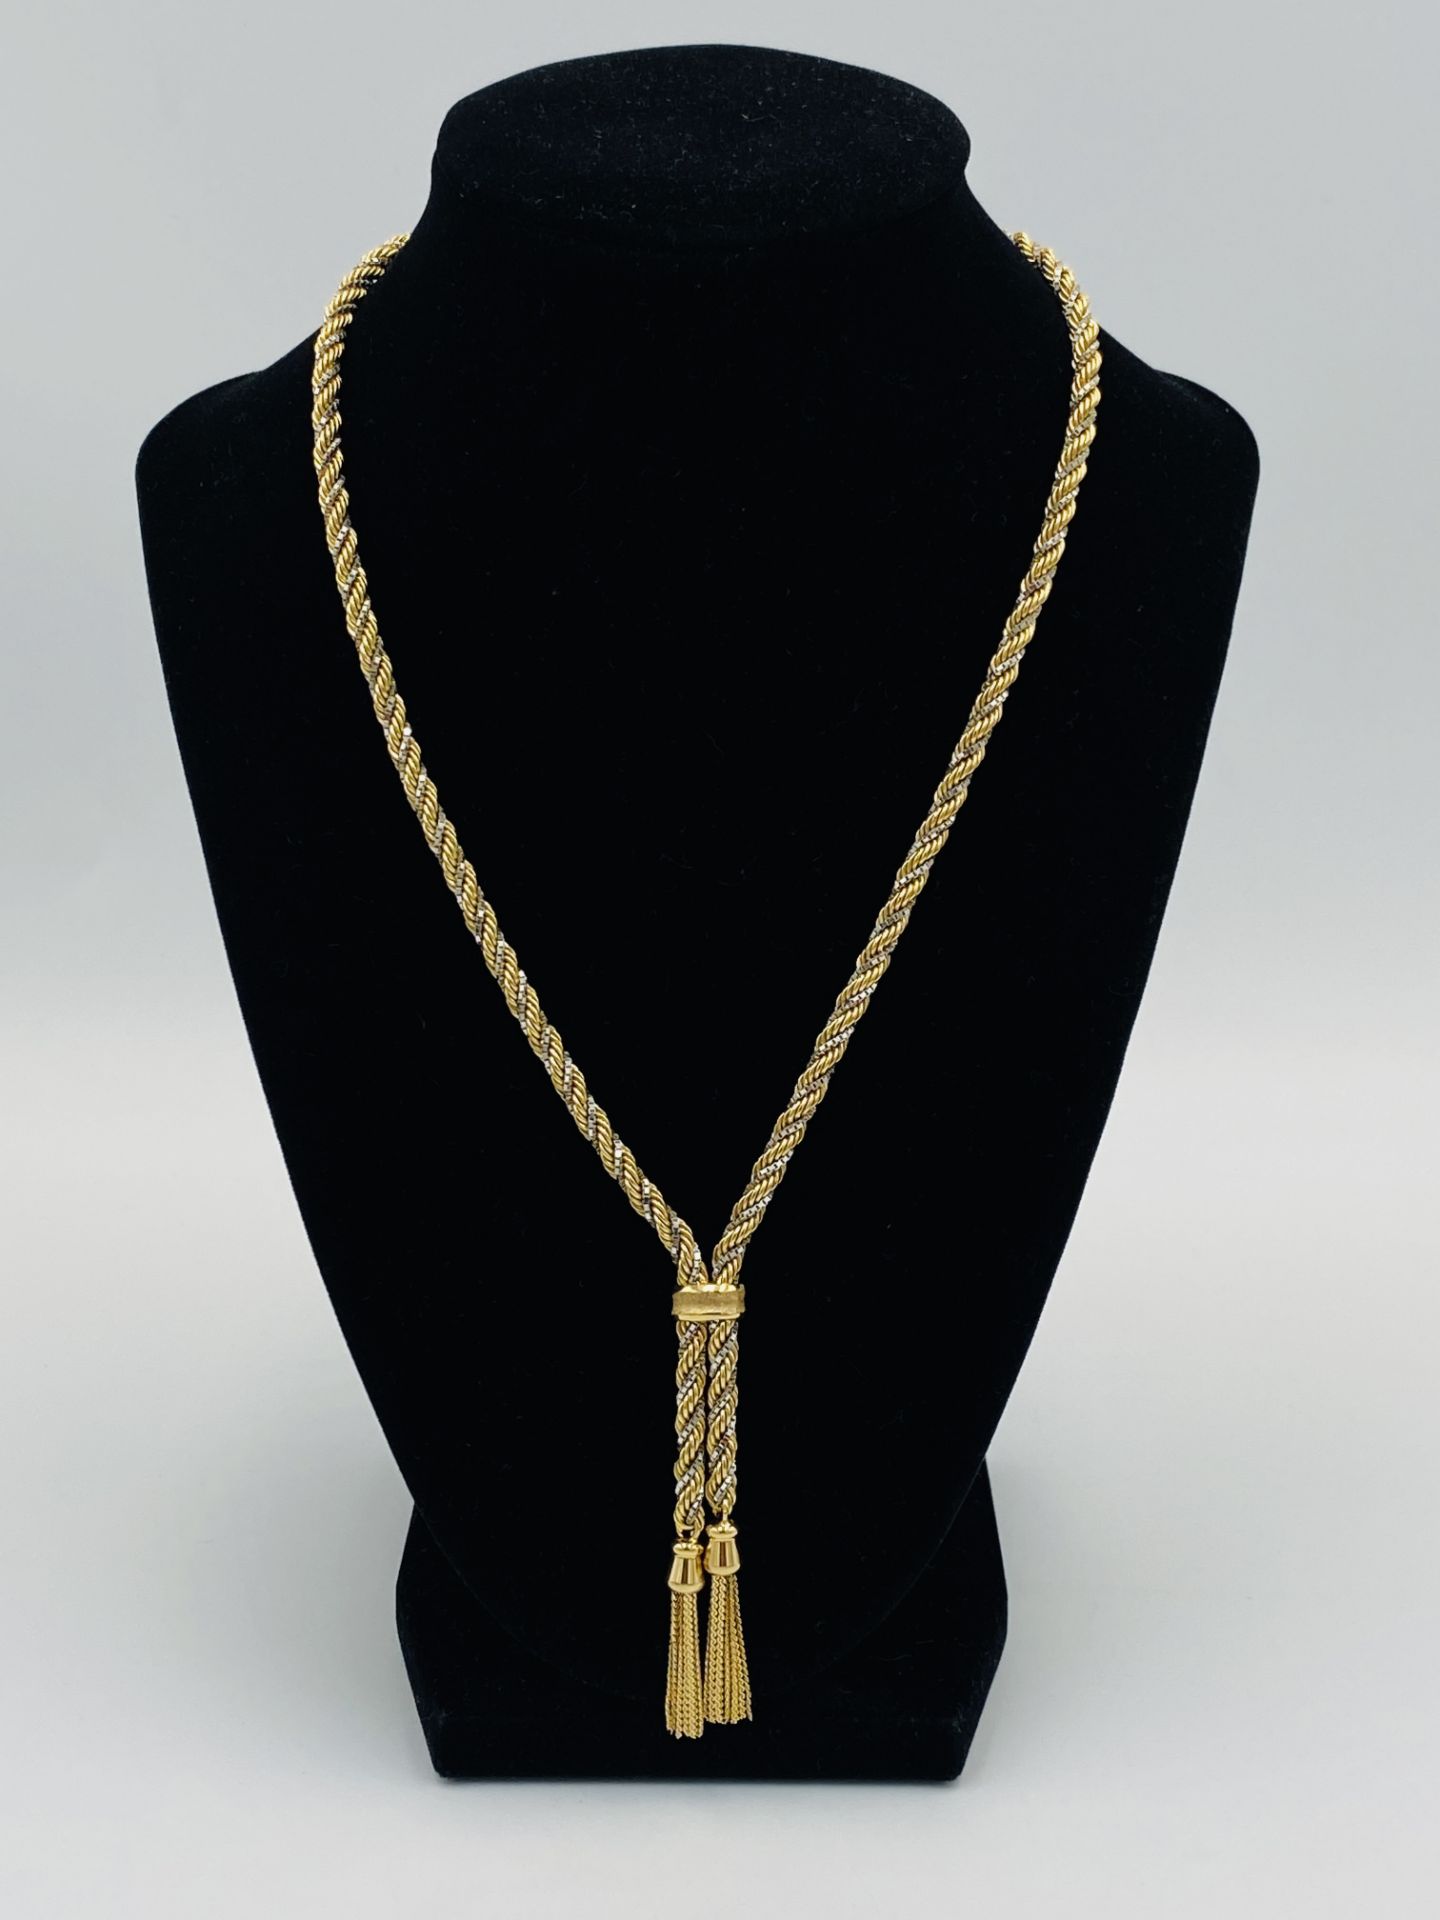 9ct gold and white metal rope twist necklace - Image 4 of 4